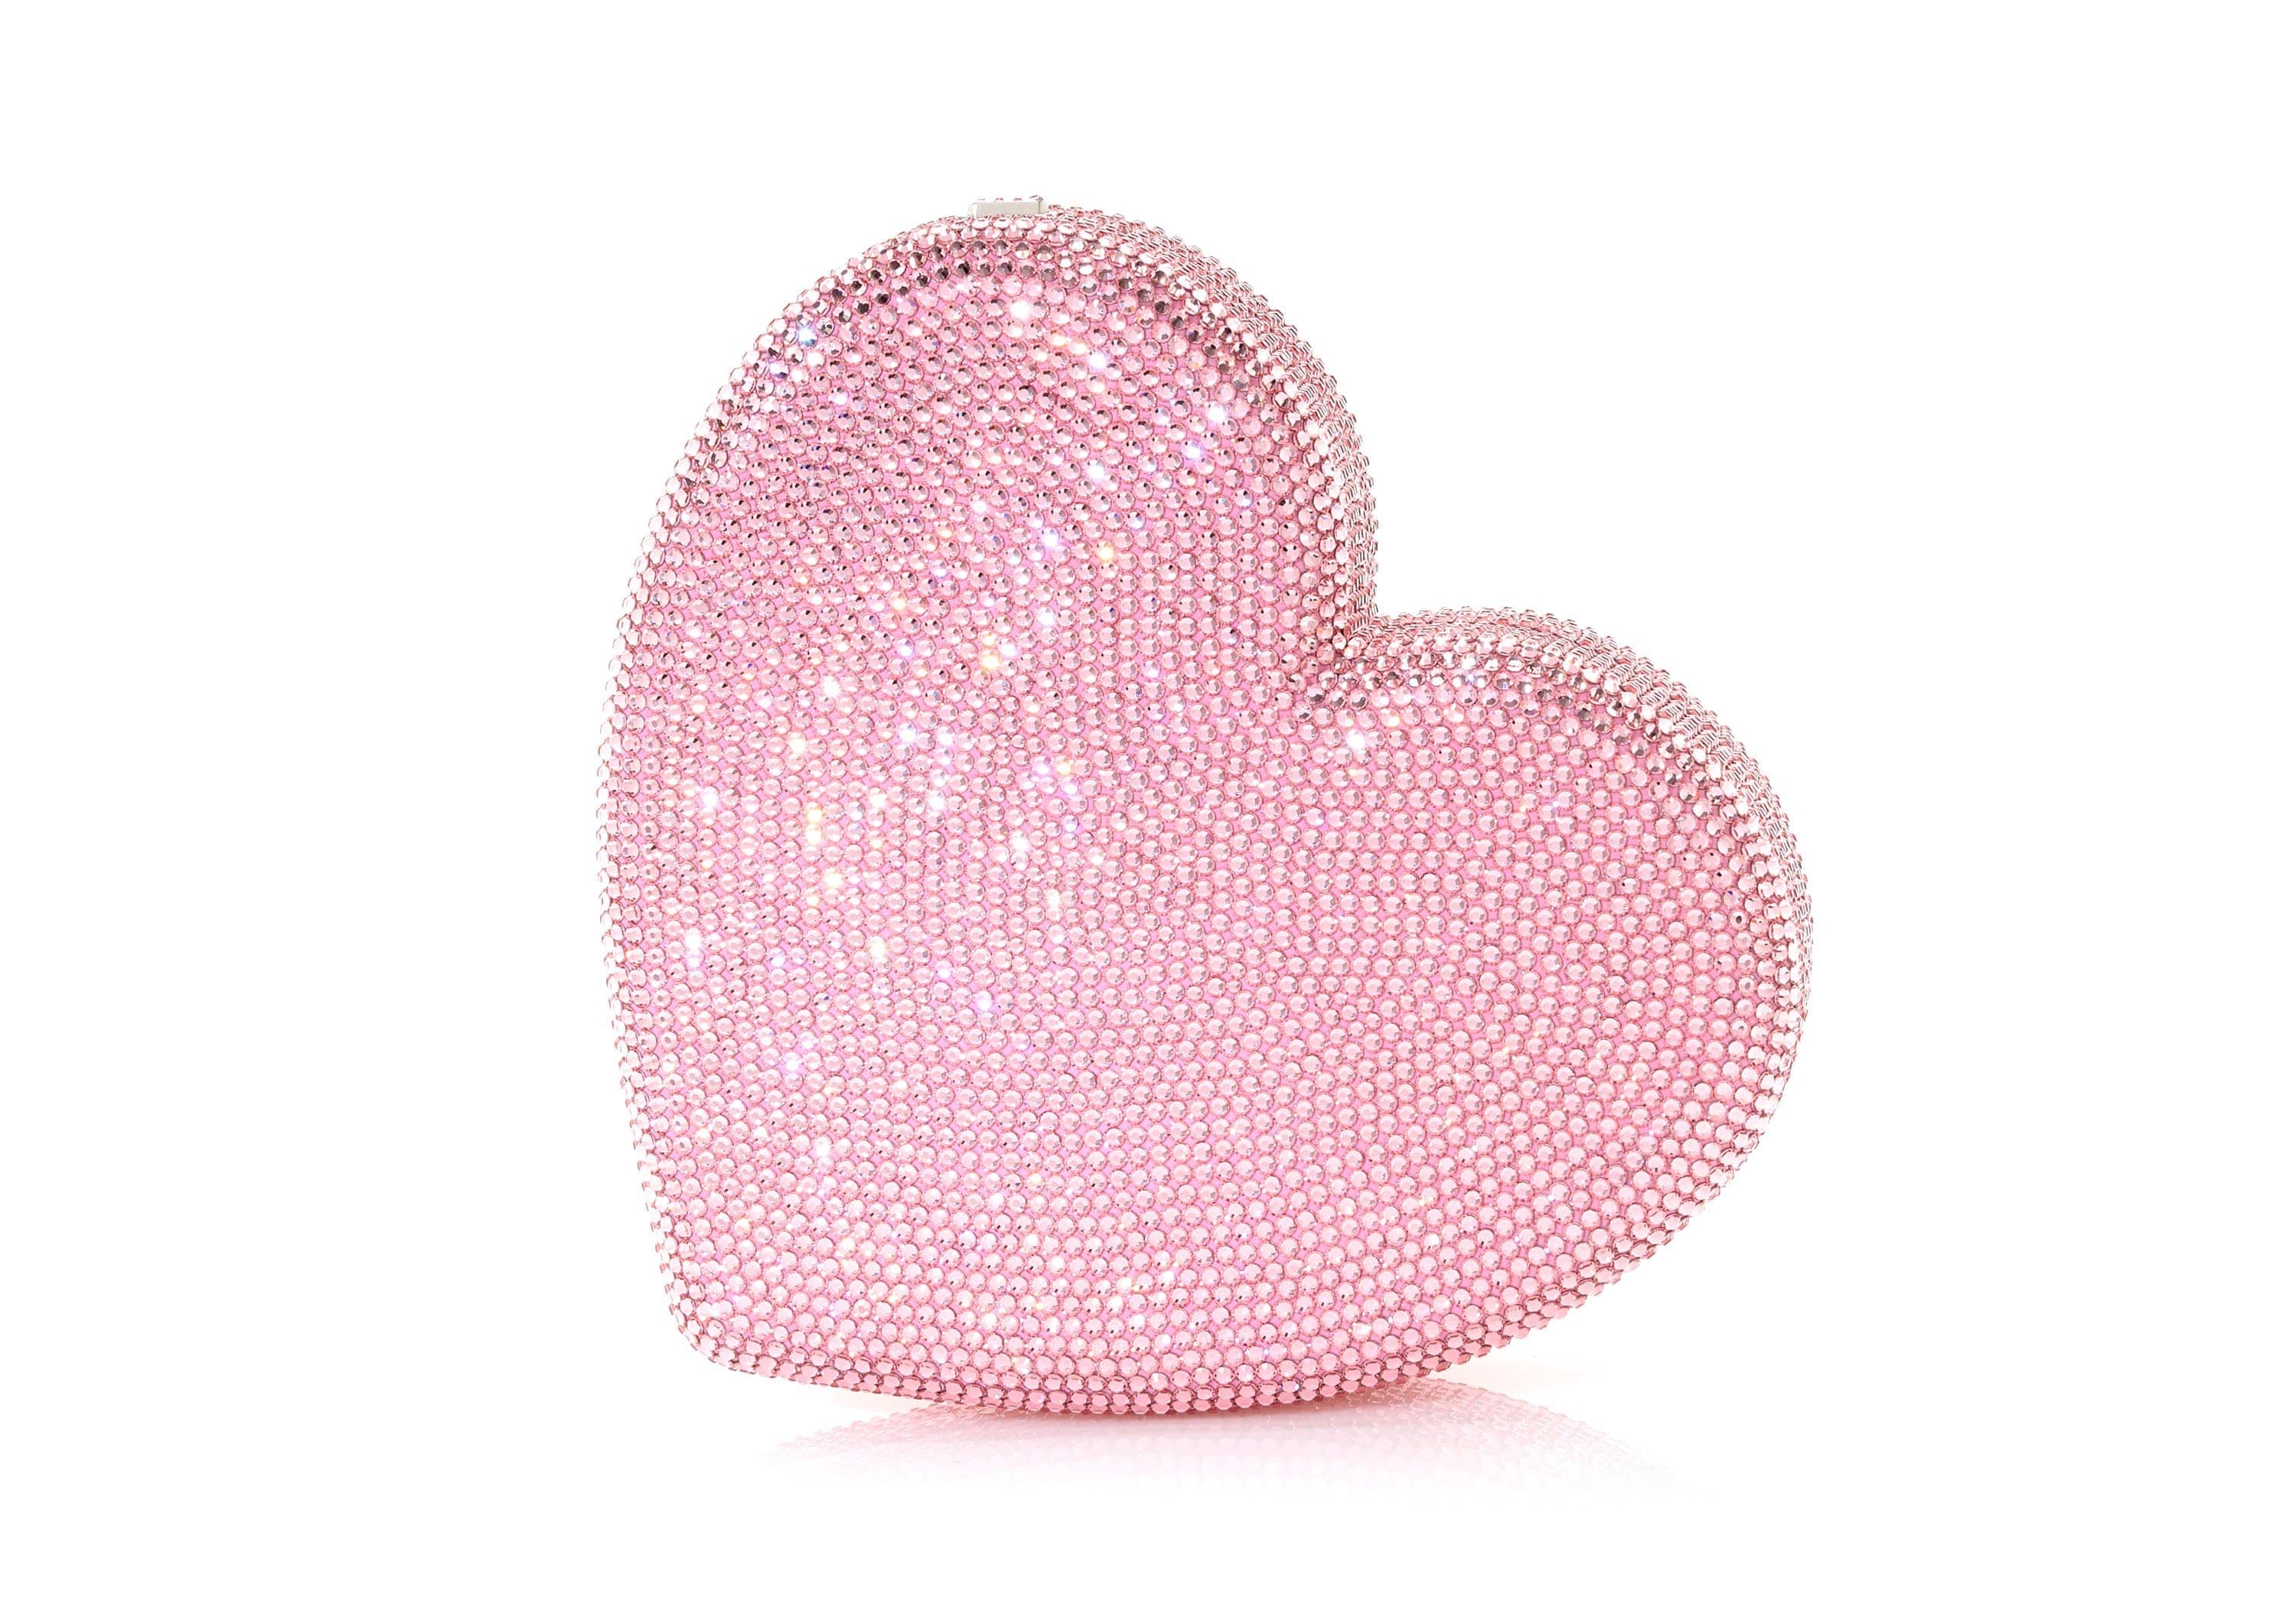 Judith Leiber Couture Heart Fully Beaded Clutch Bag